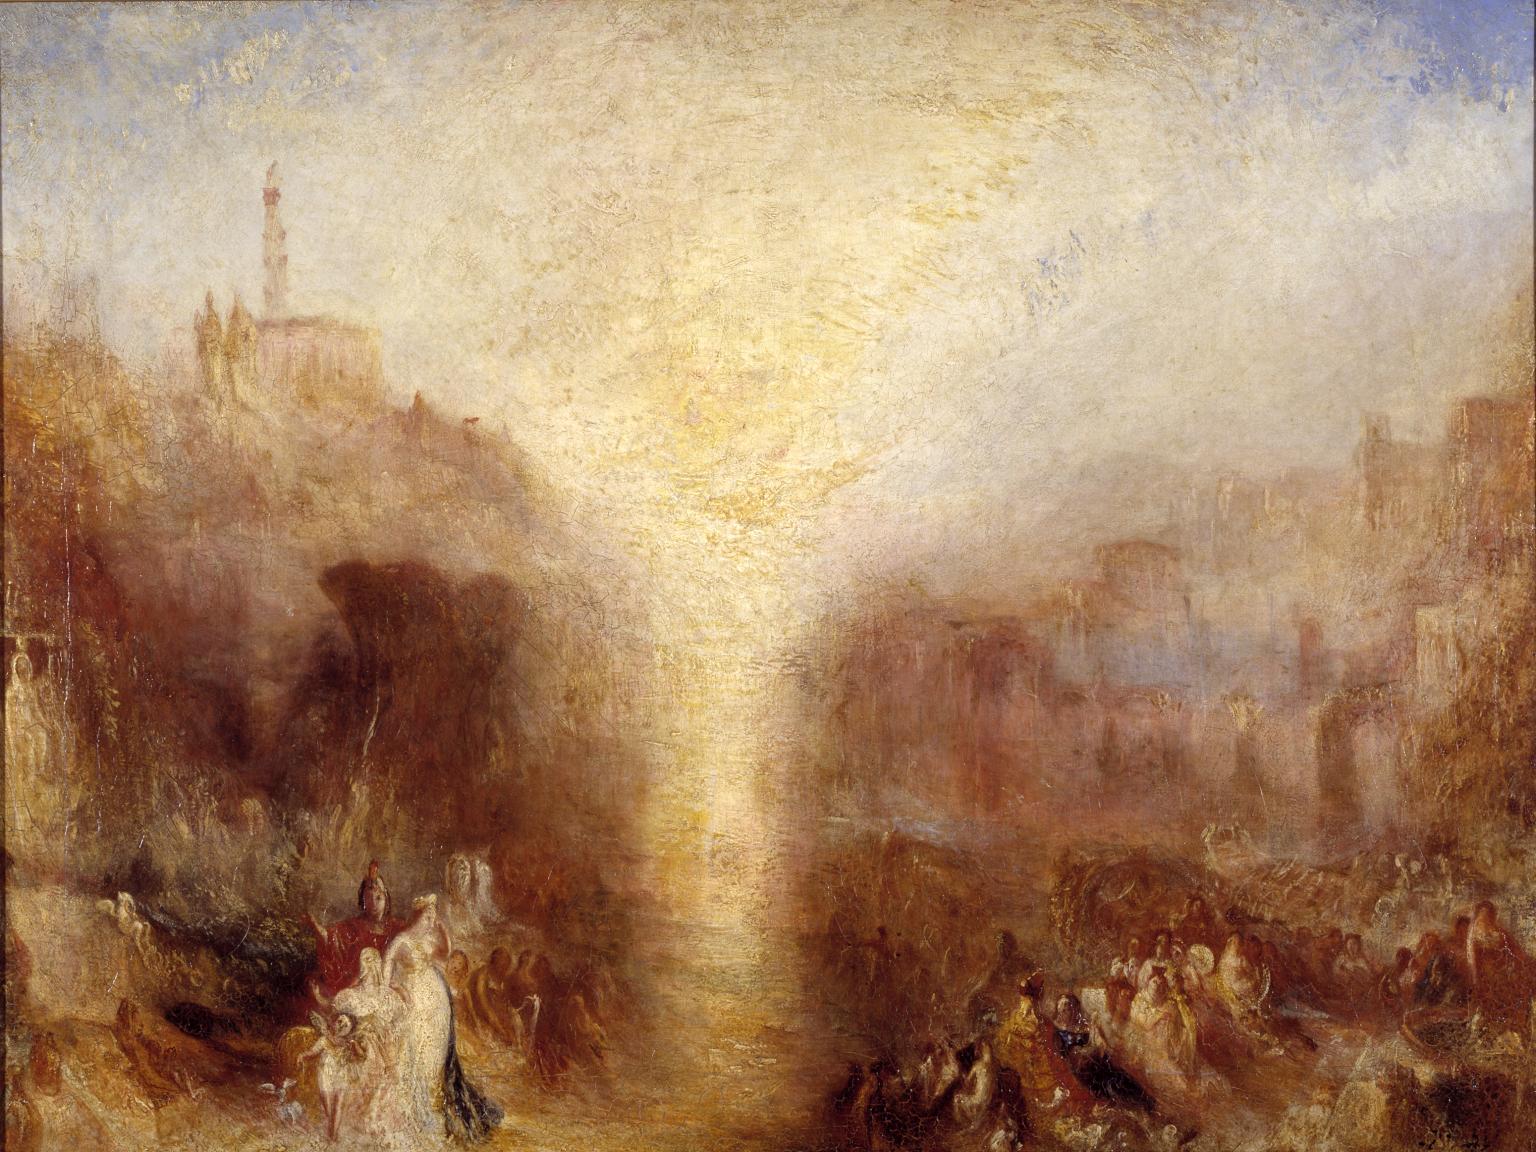 The Visit to the Tomb exhibited 1850 by Joseph Mallord William Turner 1775-1851